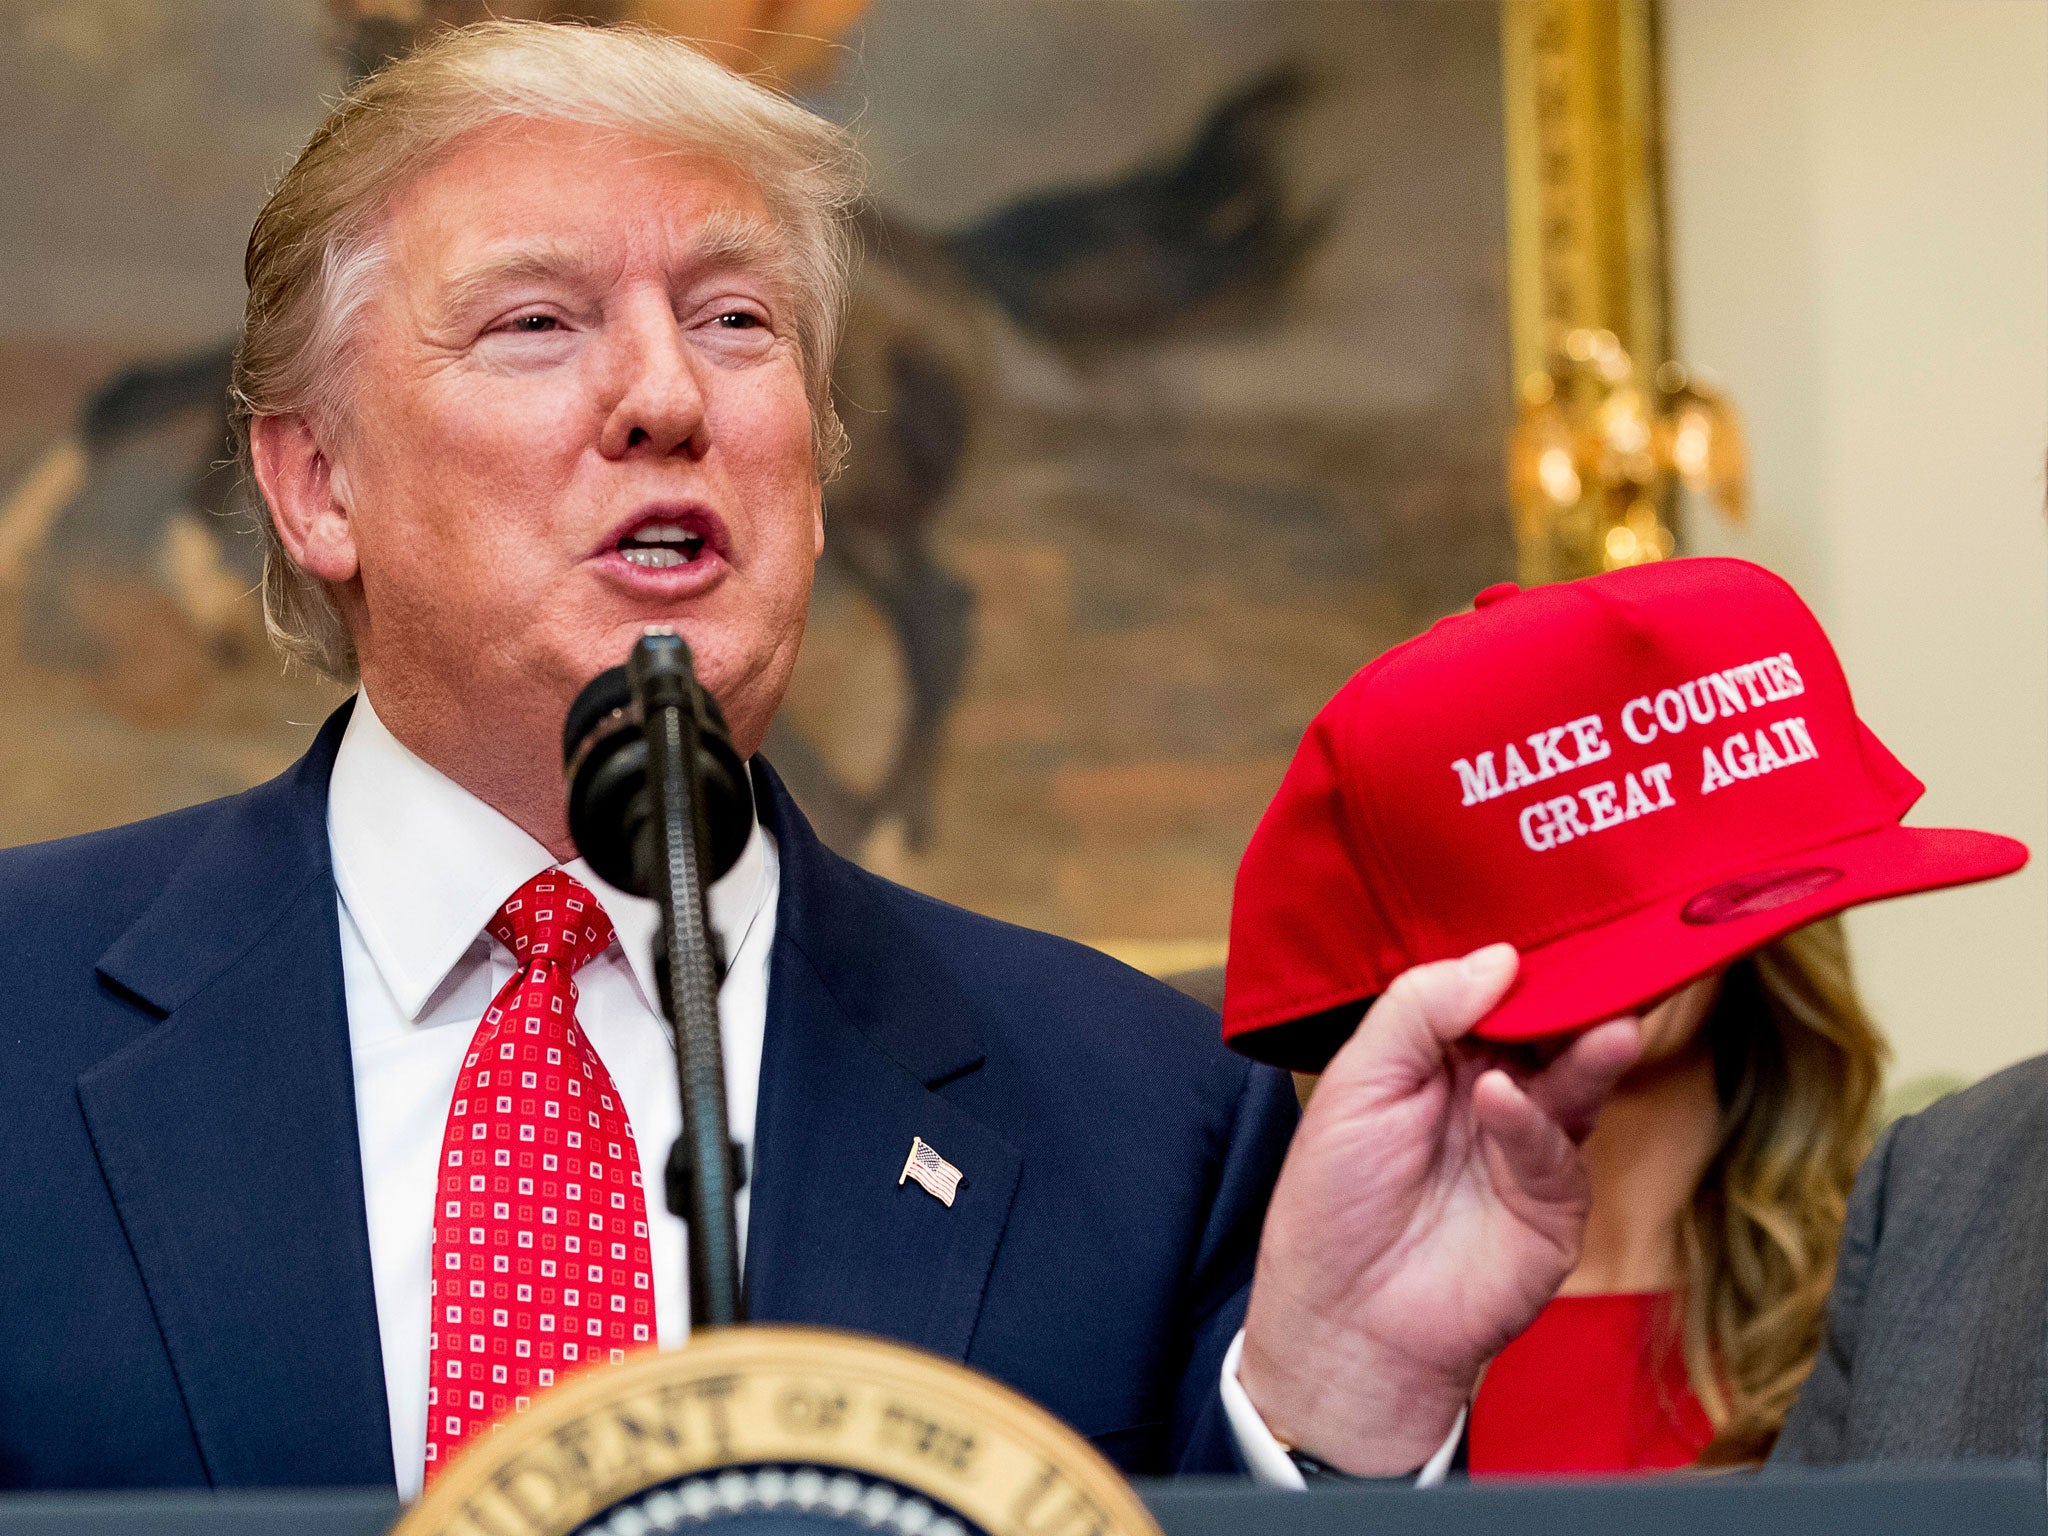 President Donald Trump holds up a hat that reads "Make Counties Great Again"